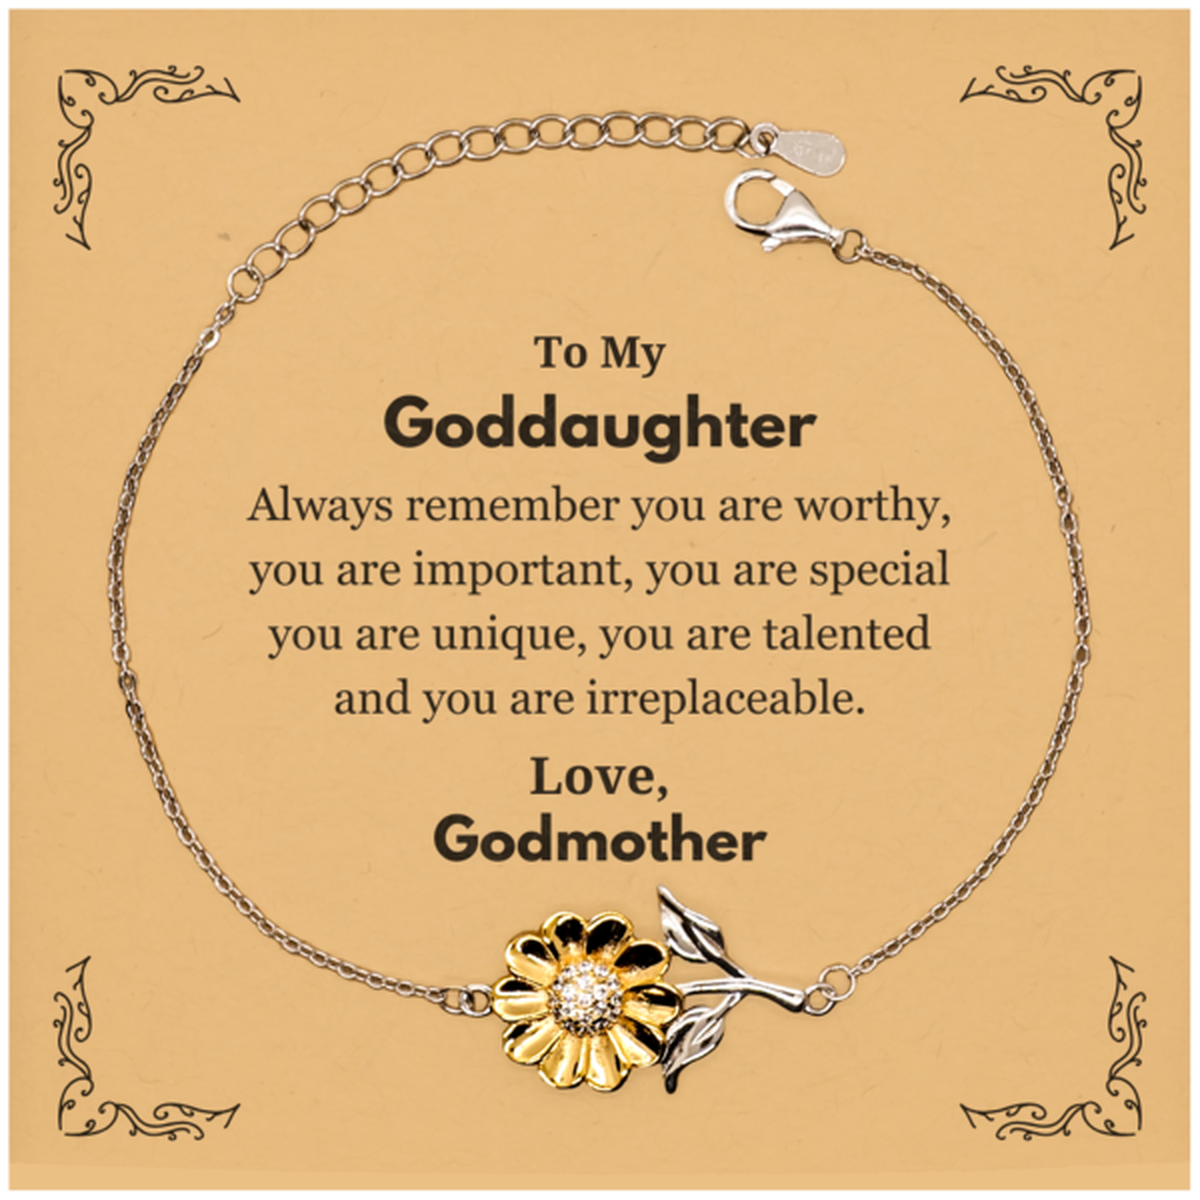 Goddaughter Birthday Gifts from Godmother, Inspirational Sunflower Bracelet for Goddaughter Christmas Graduation Gifts for Goddaughter Always remember you are worthy, you are important. Love, Godmother